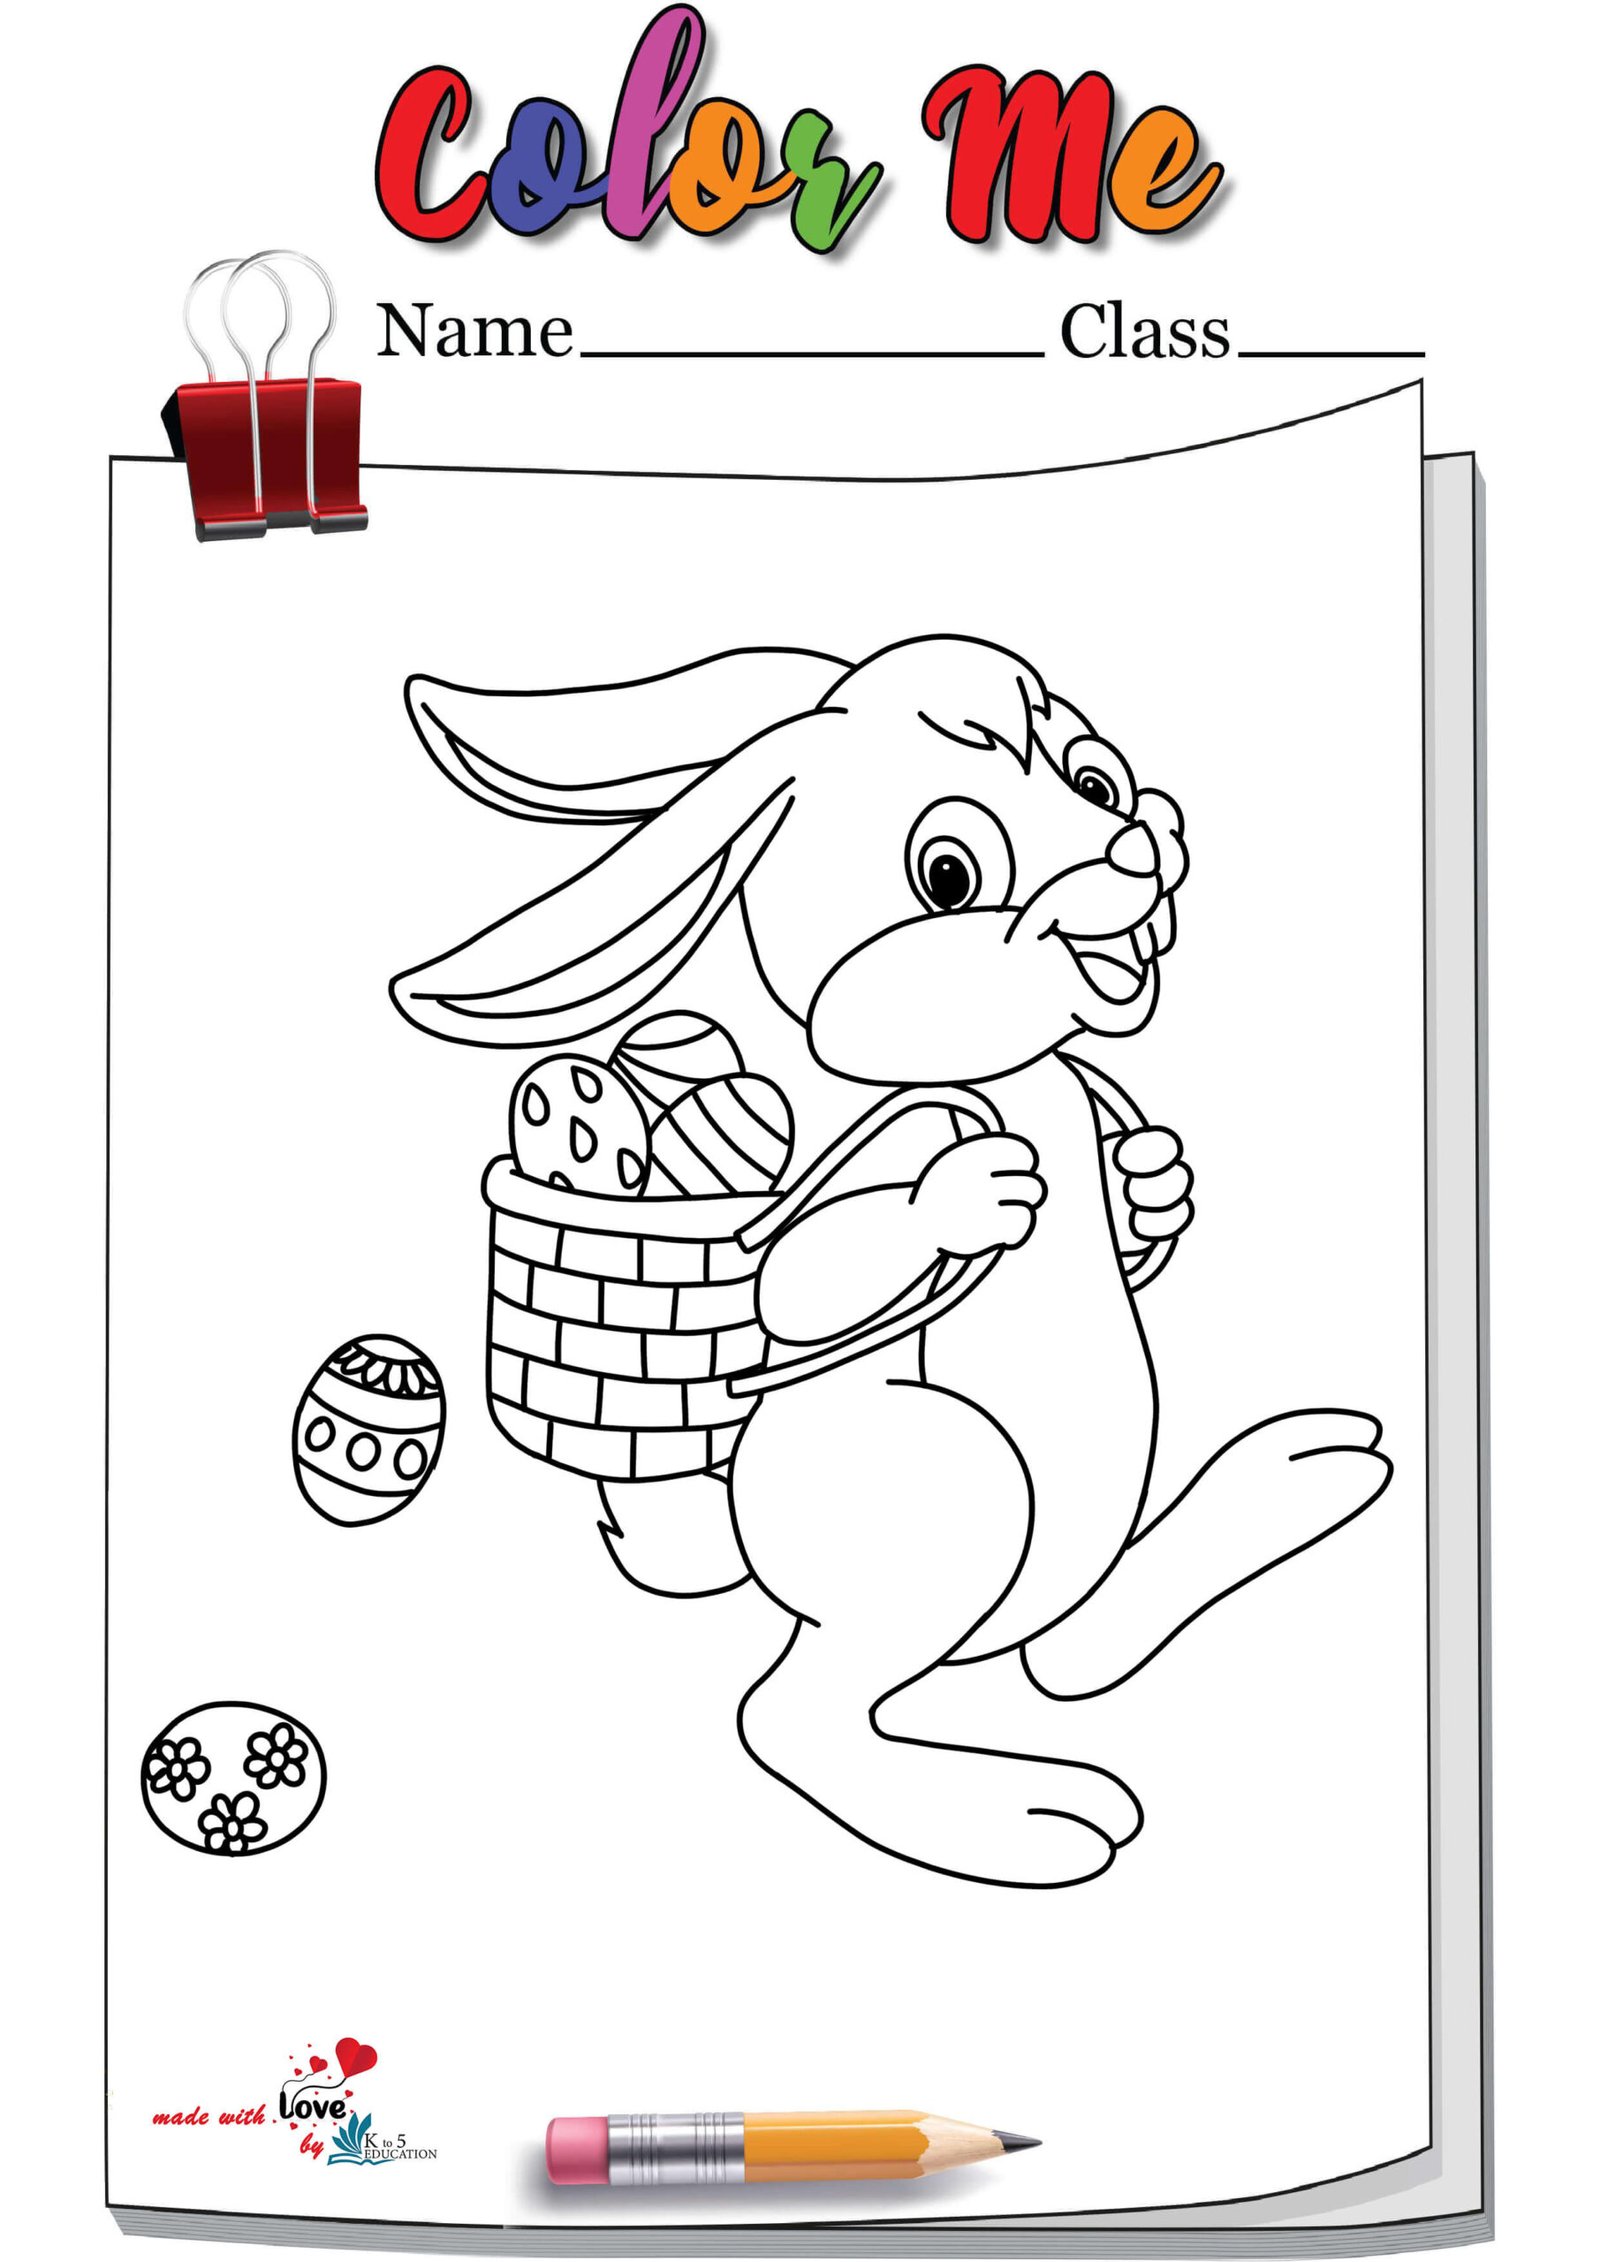 Cartoon Easter Bunny Carrying Basket Coloring Page